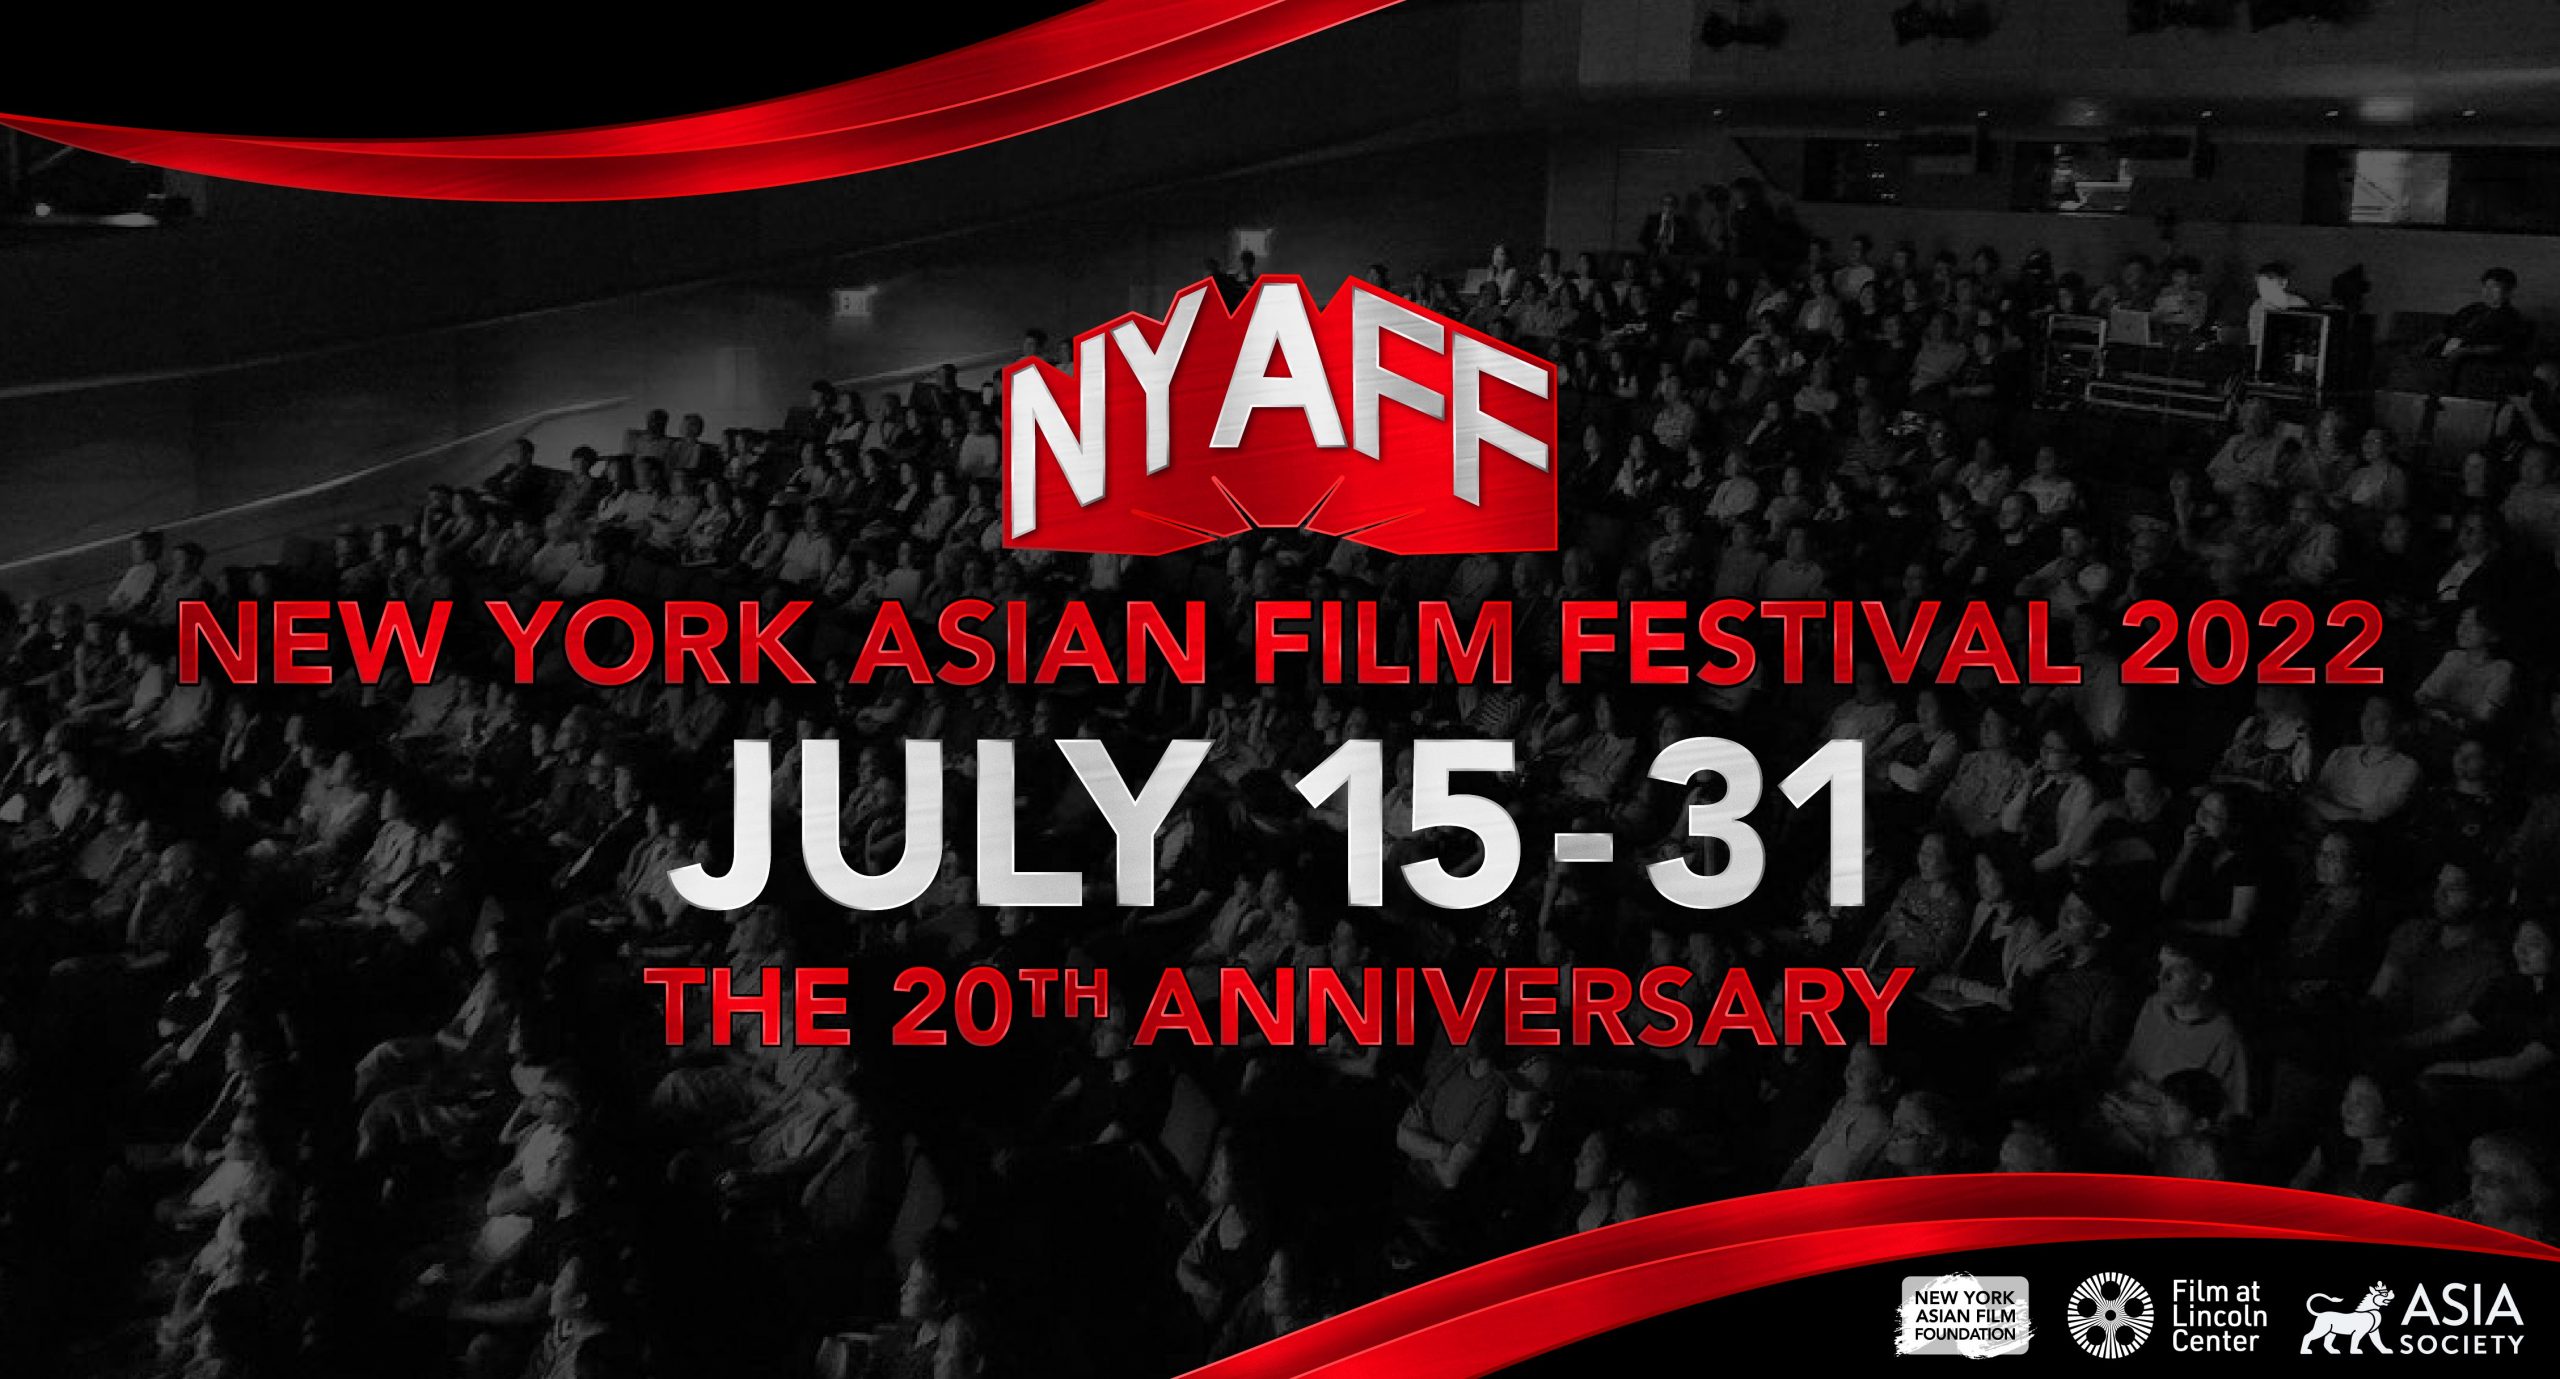 The 20th anniversary of the New York Asian Film Festival, July 15-31